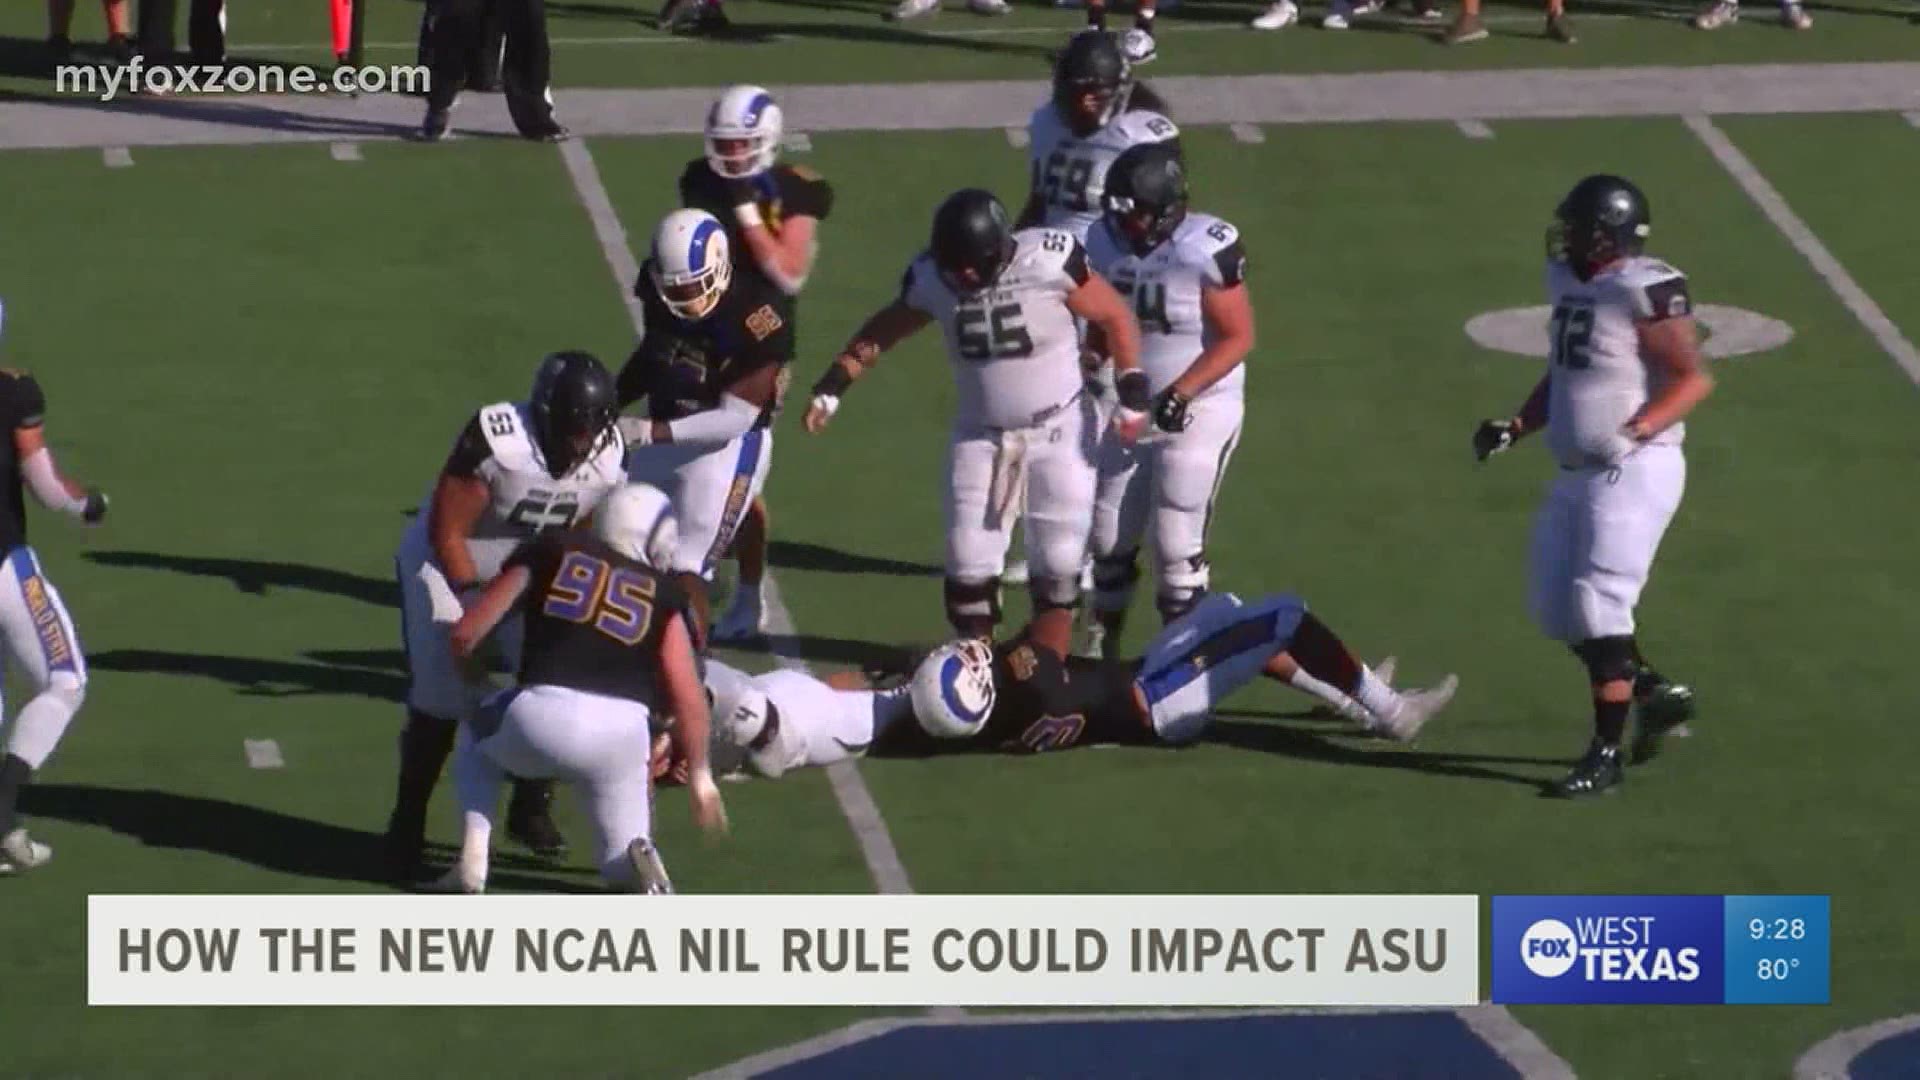 The NIL rule is currently impacting NCAA Division I FBS schools.